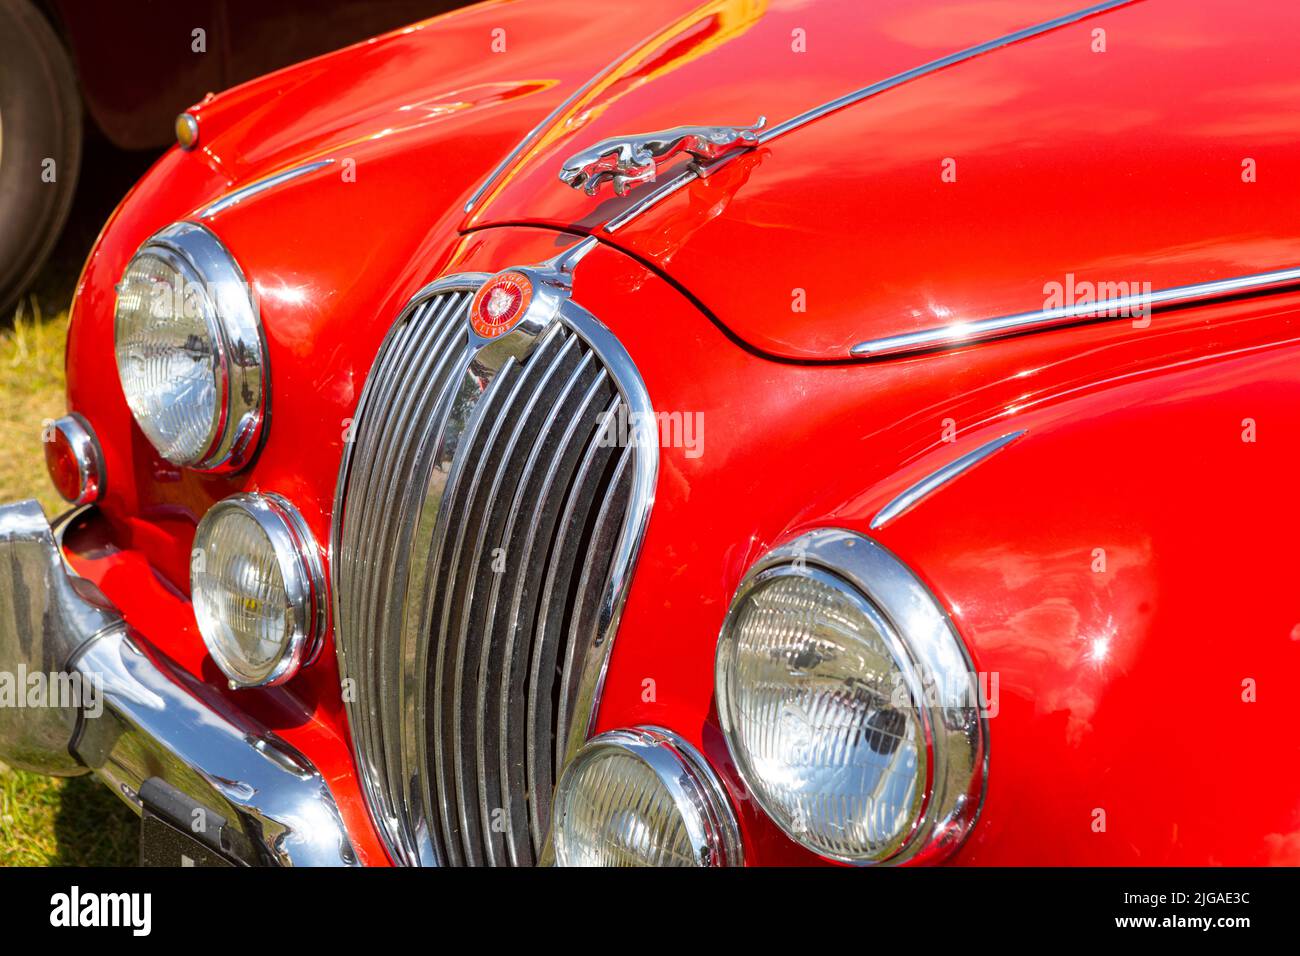 The bonnet and headlights of a red Jaguar 3.4 litre car Stock Photo